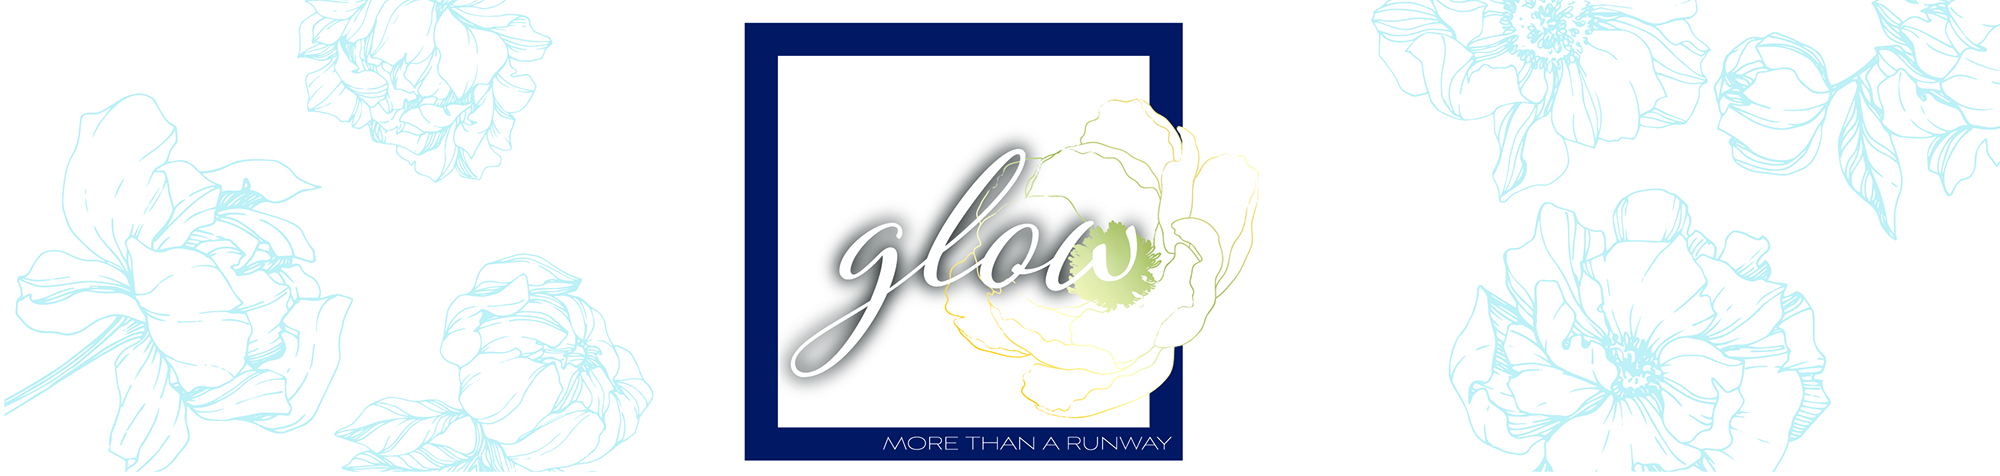 header image for glow fashion show